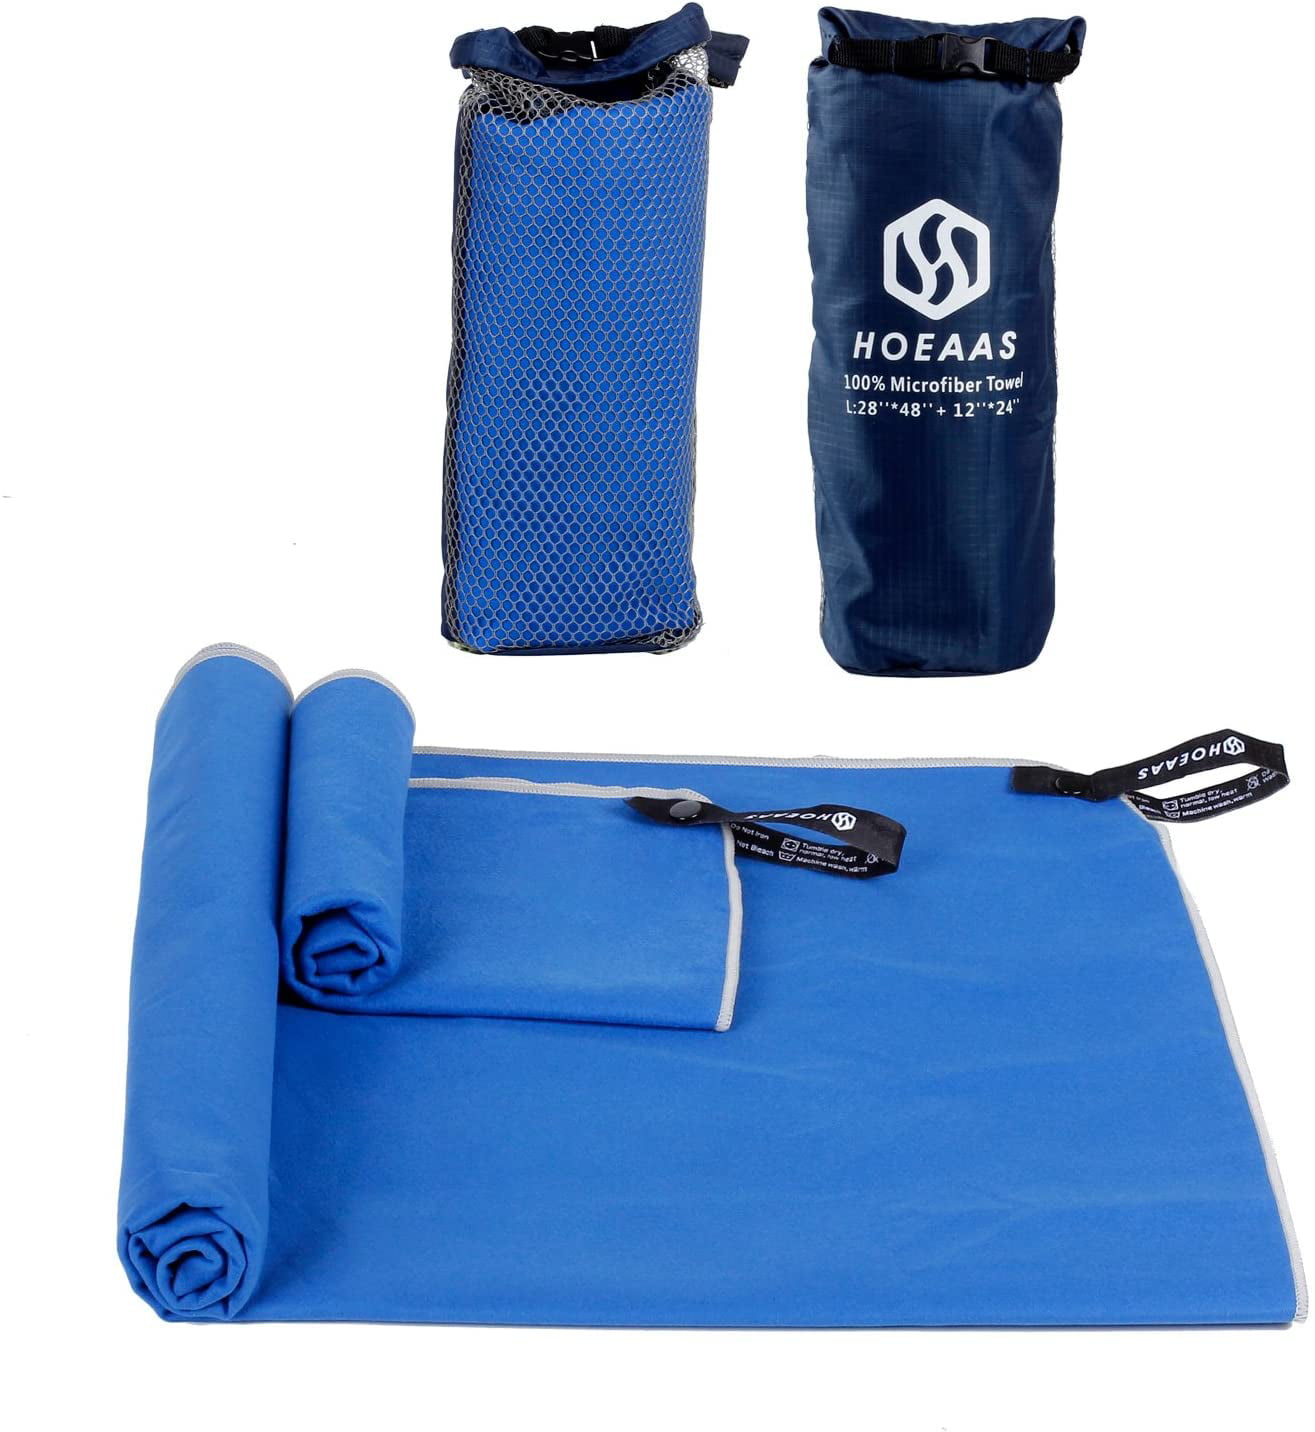 Body&Hand 2 Pack Lightweight Compact Microfiber Travel & Sports Towels 